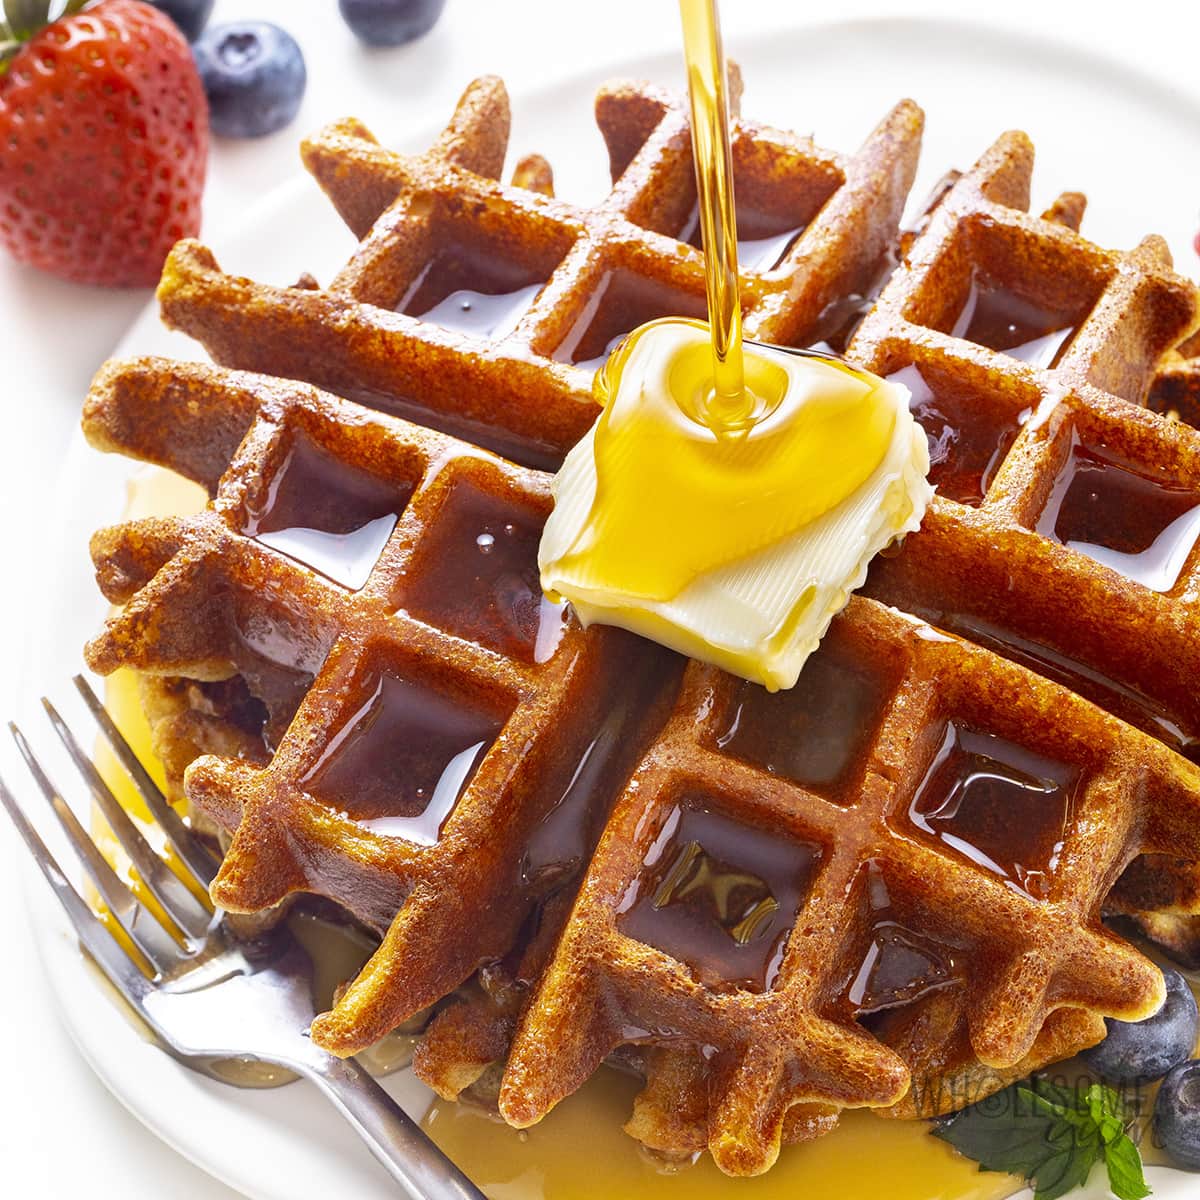 Keto almond flour waffles on a plate with syrup.